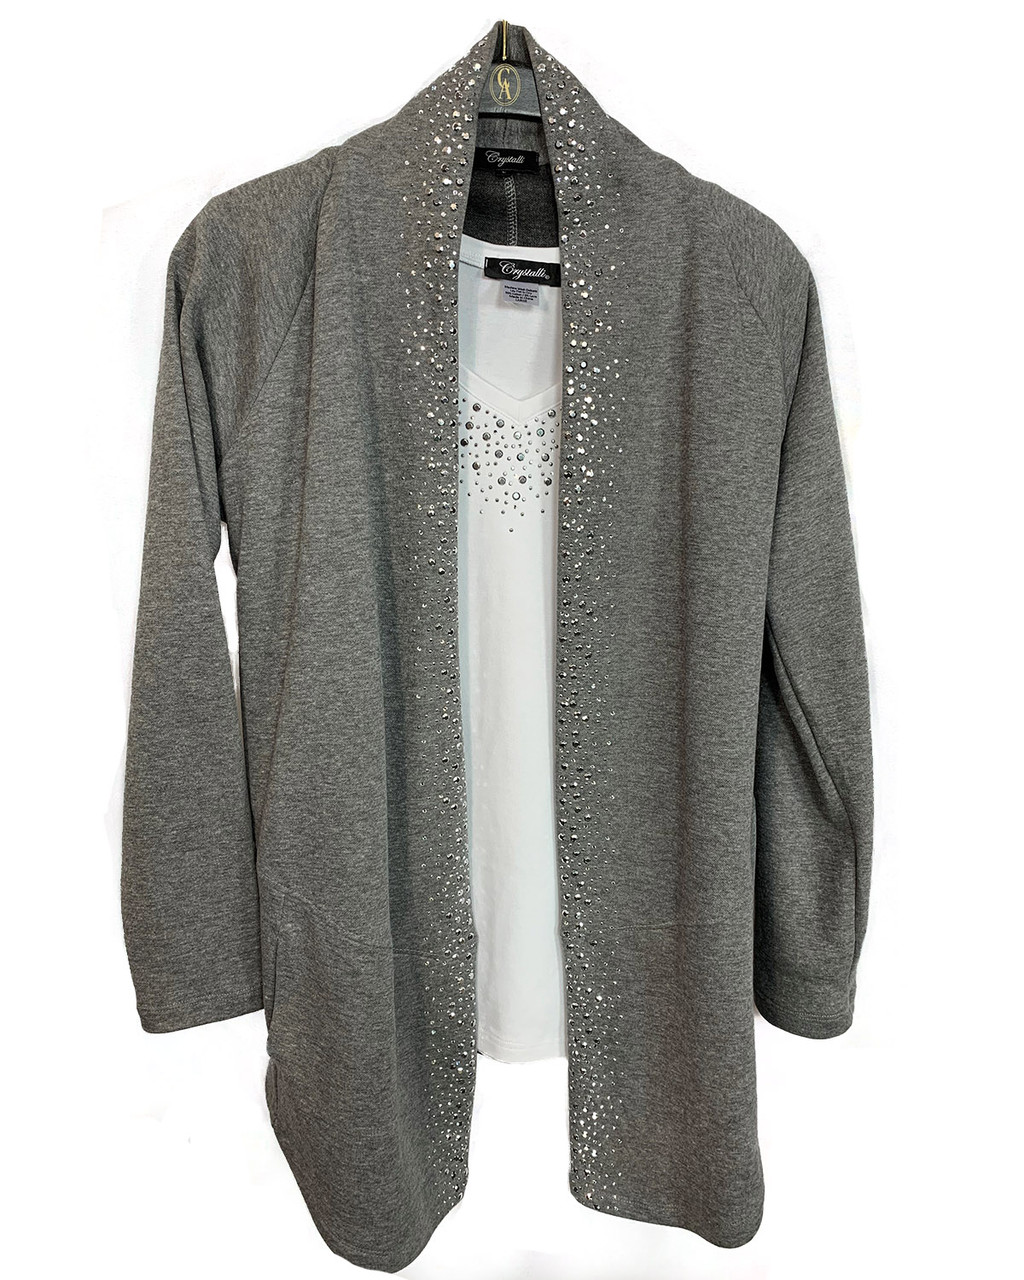 Silver Scattered Trim Cardigan